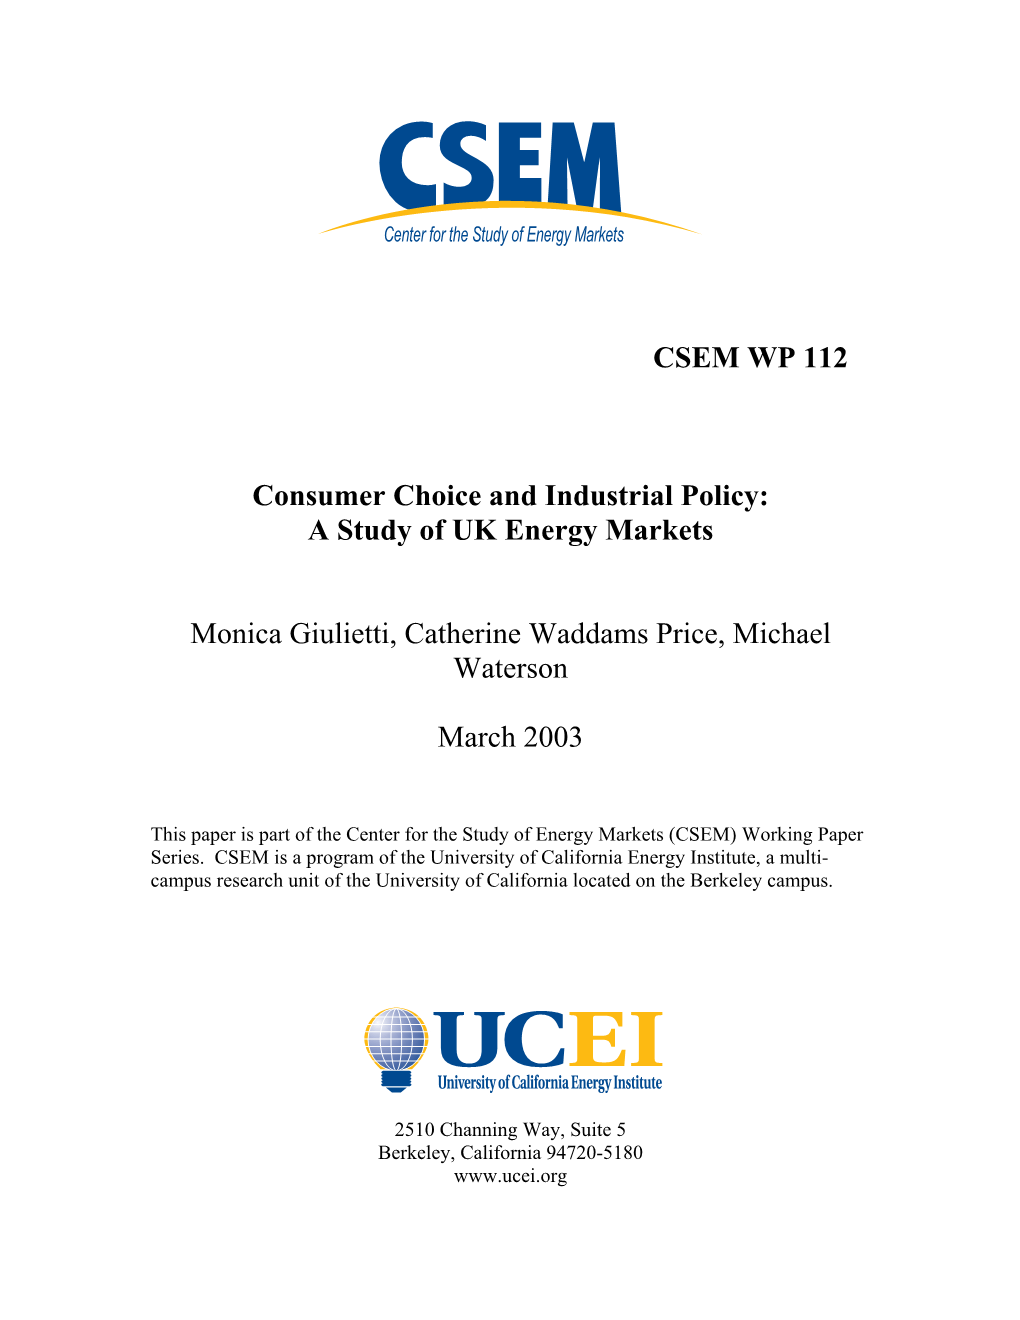 CSEM WP 112 Consumer Choice and Industrial Policy: a Study of UK